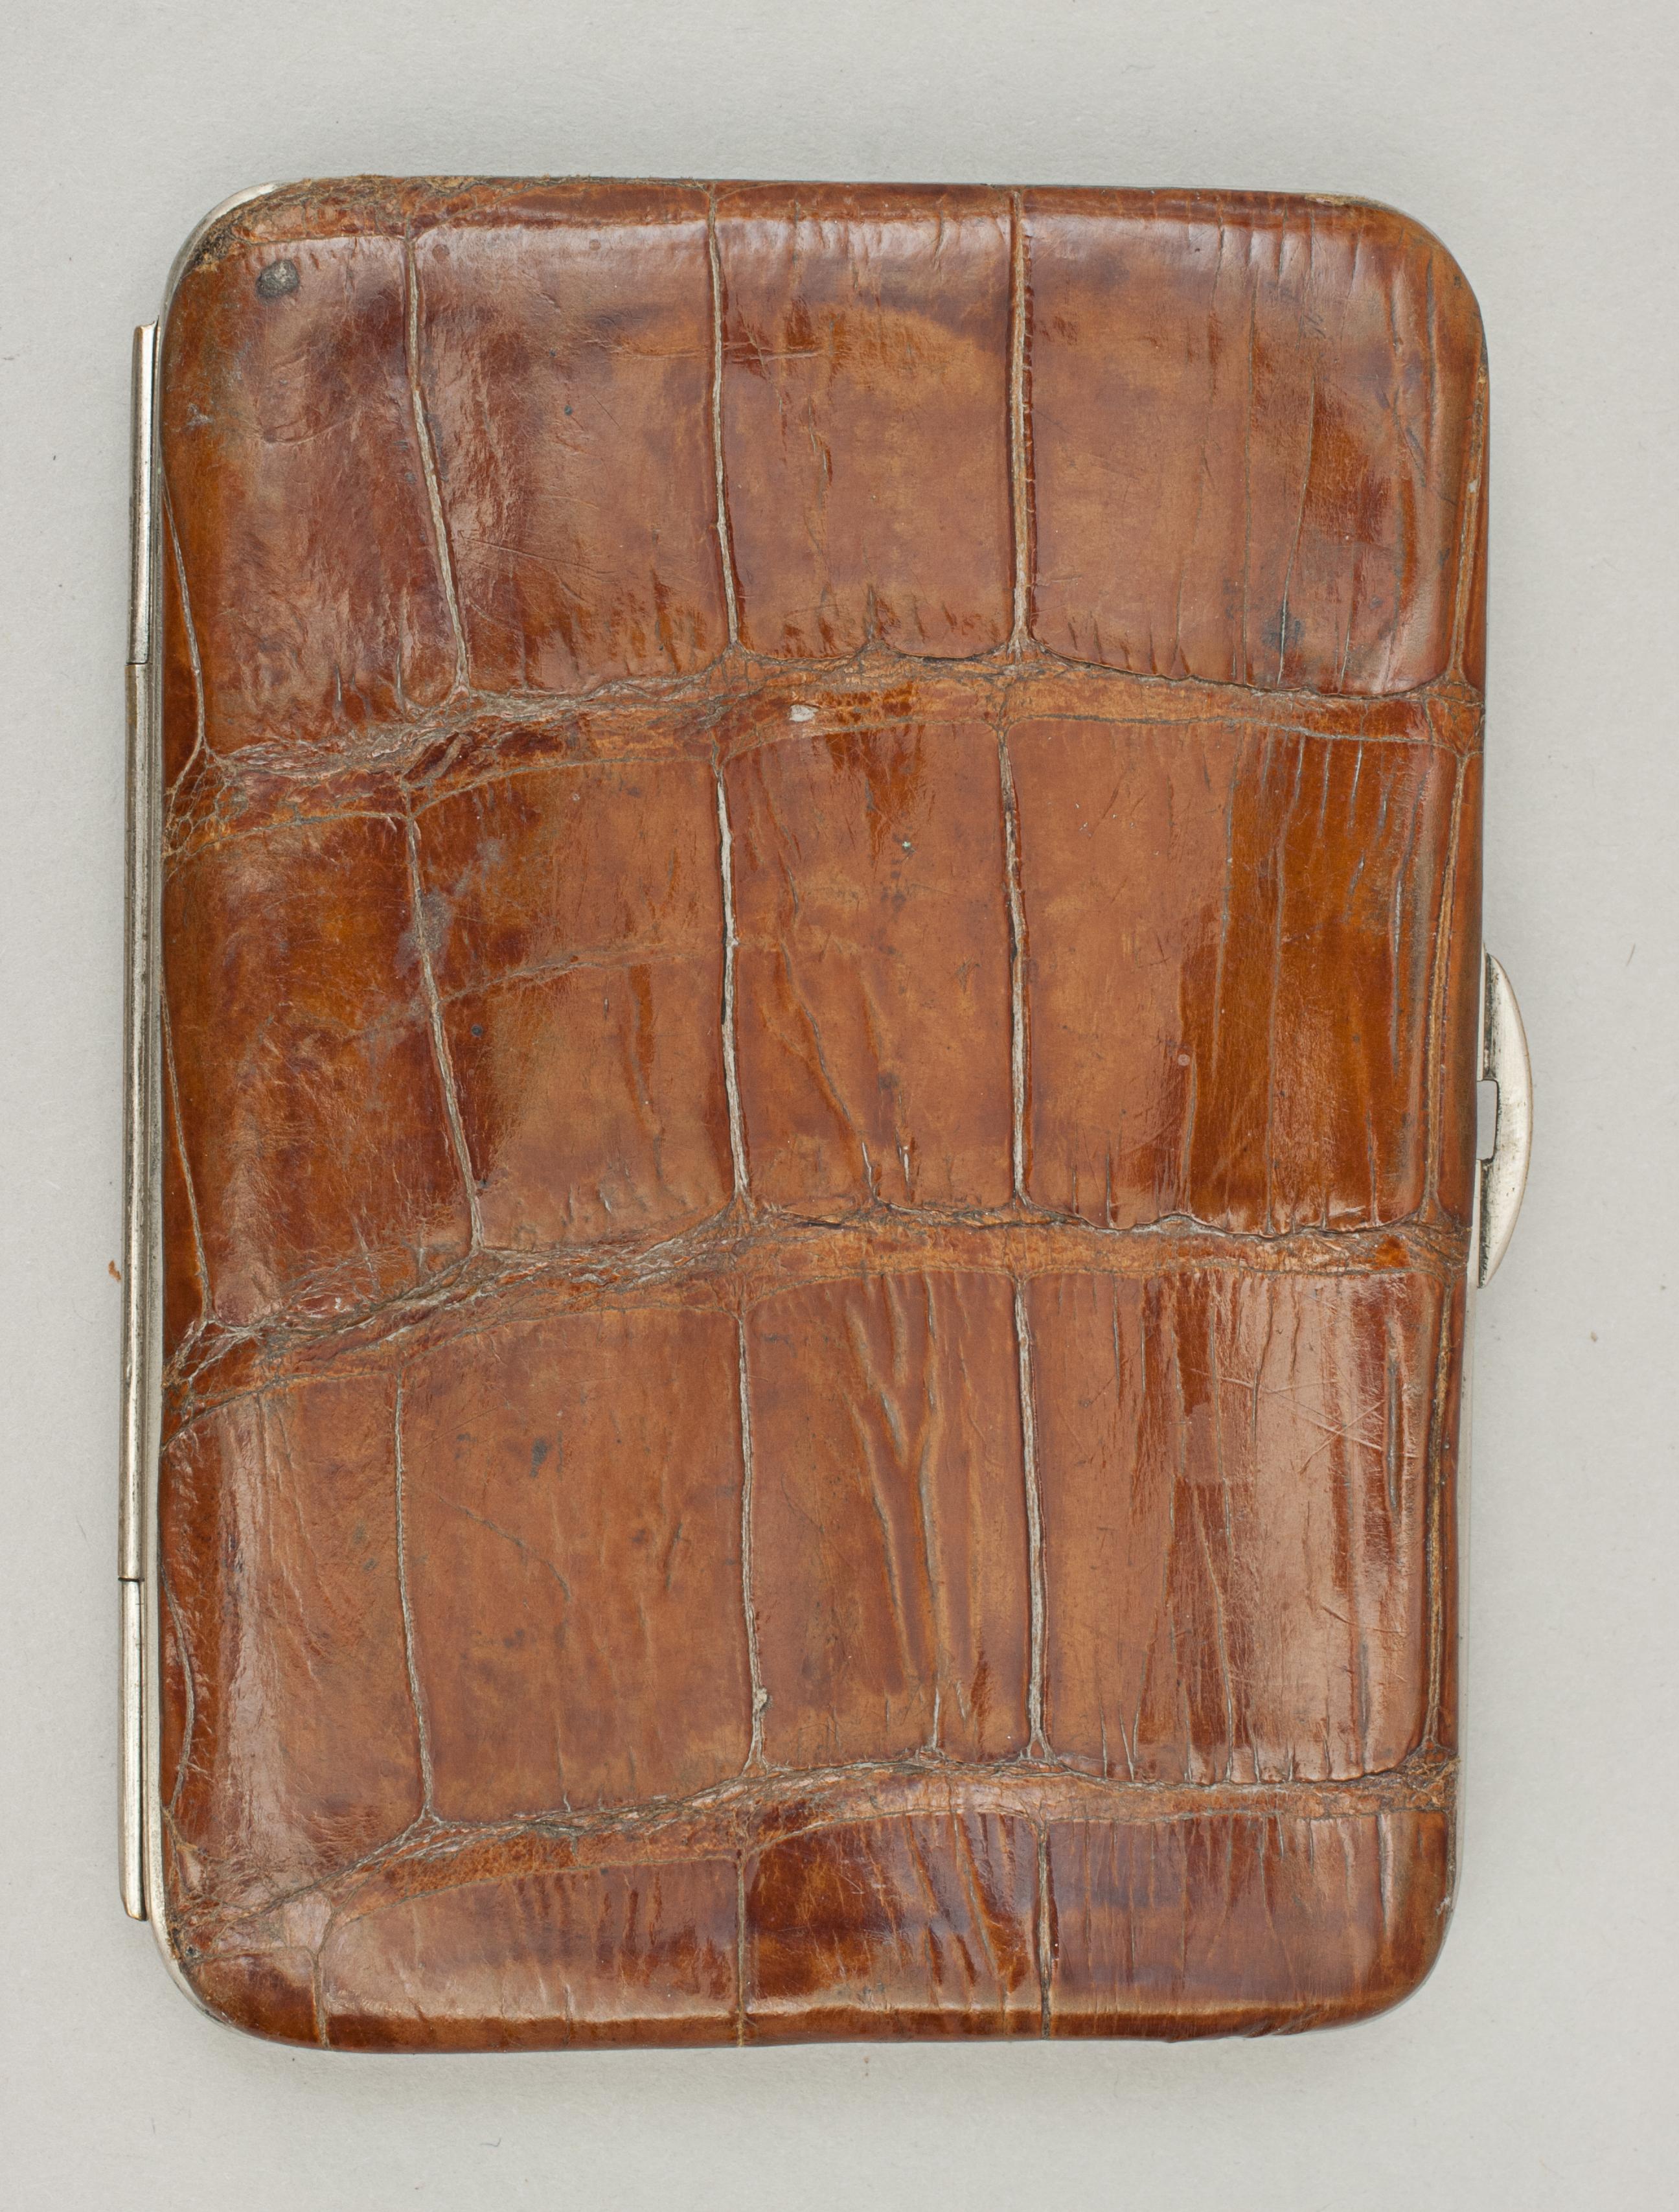 Early 20th Century Vintage Leather Wallet with Soft Interior Calf Skin with Silver Mounts For Sale